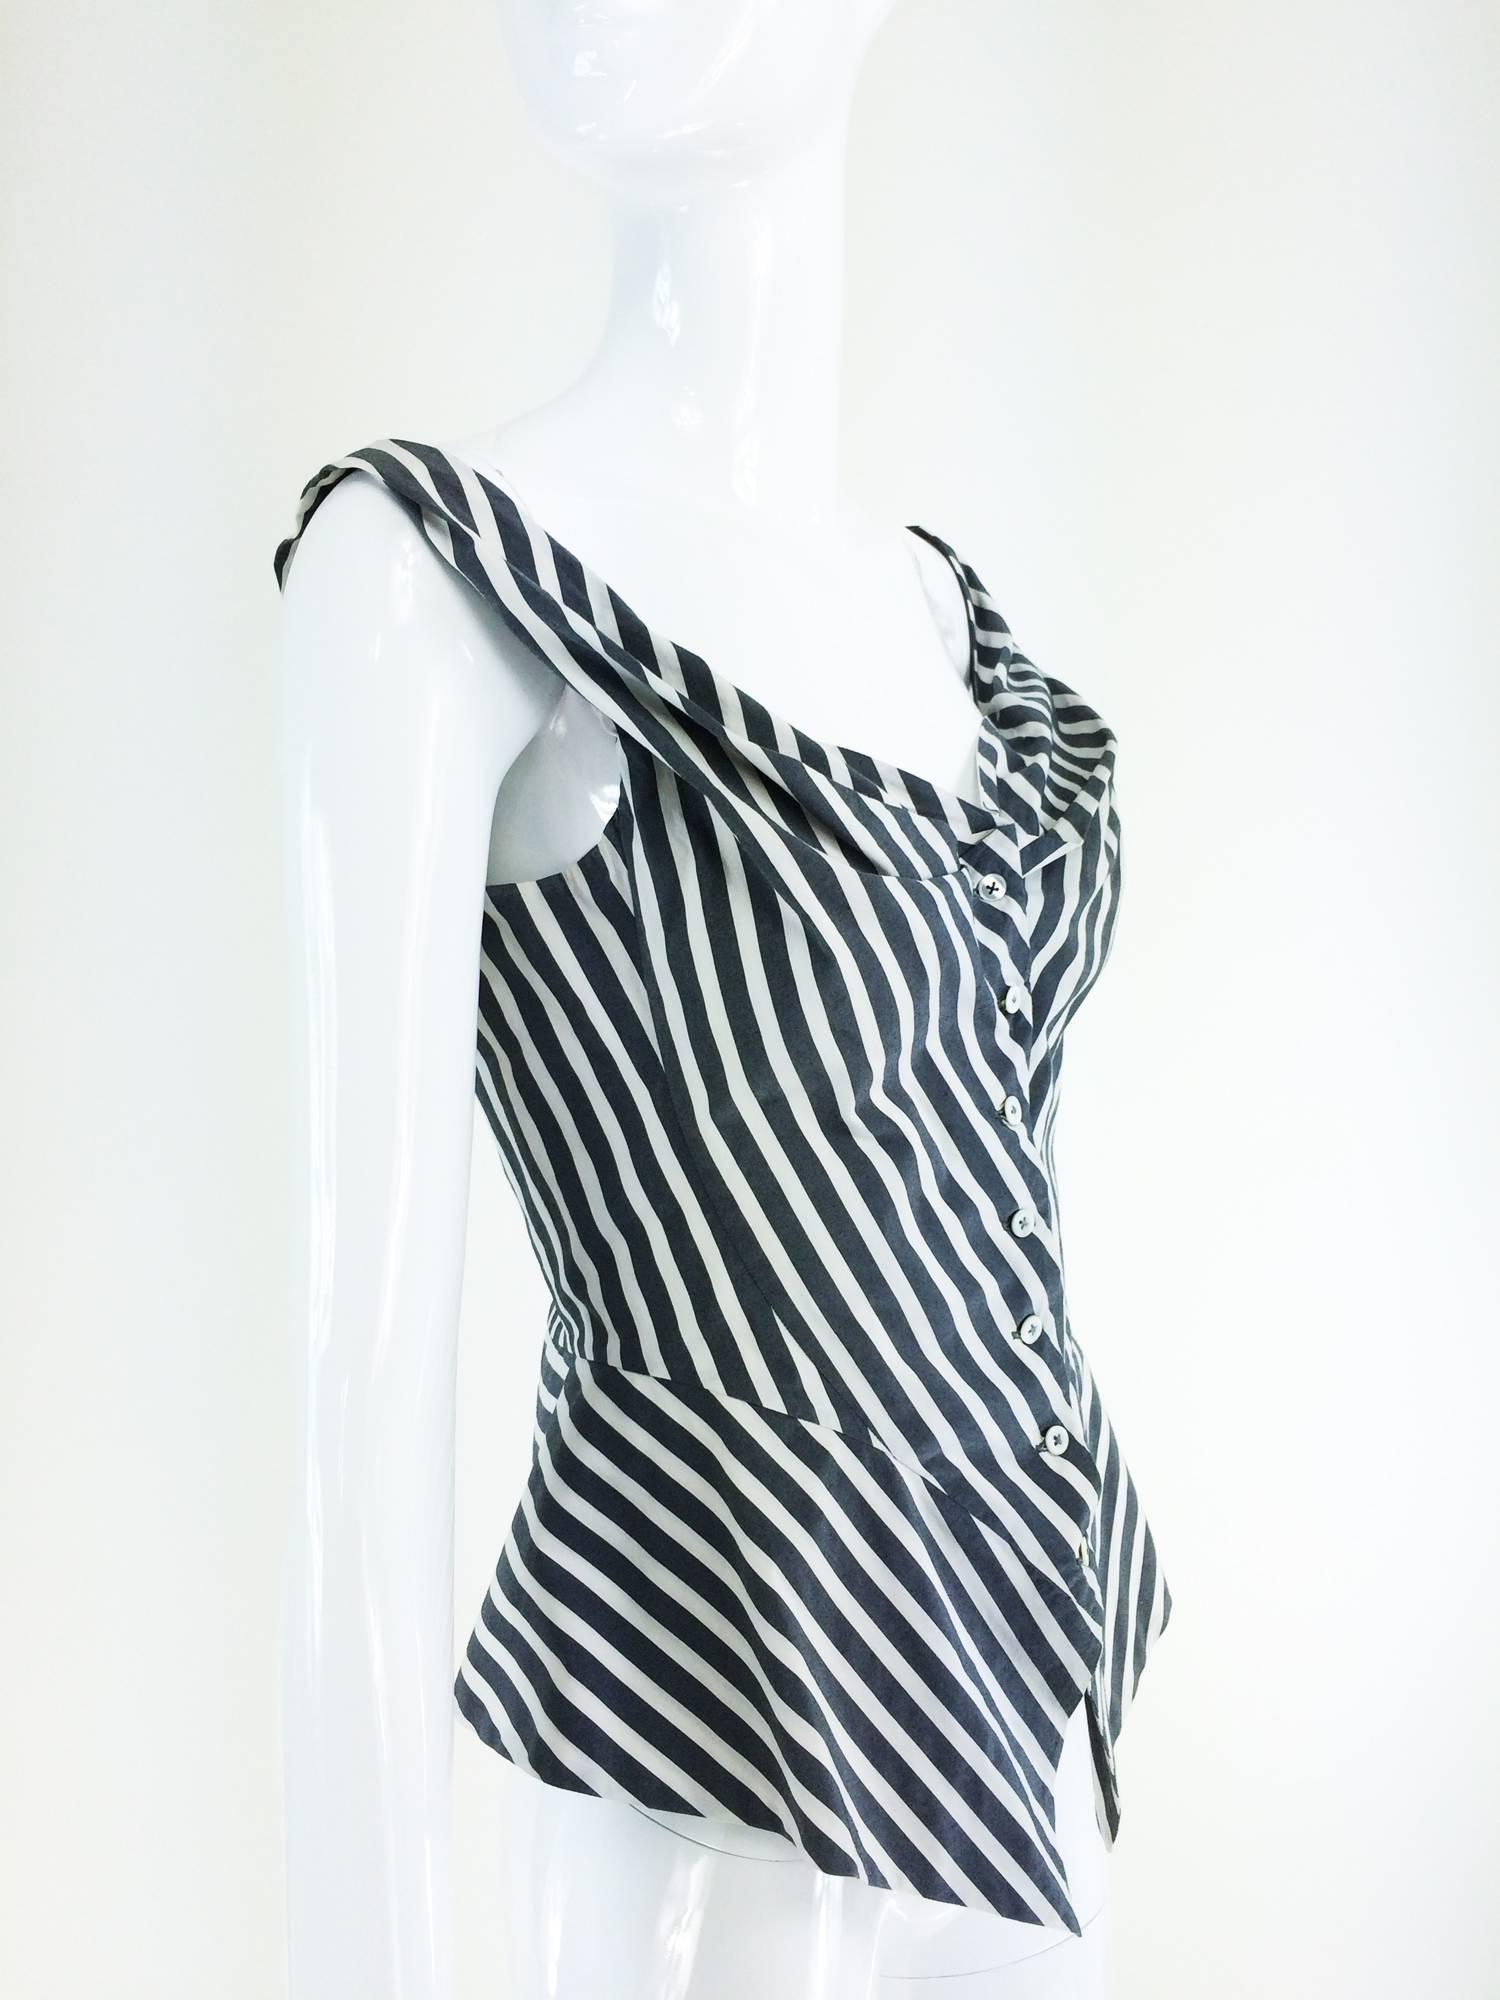 Black Vivienne Westwood Anglomania black & white striped corset top 1990s